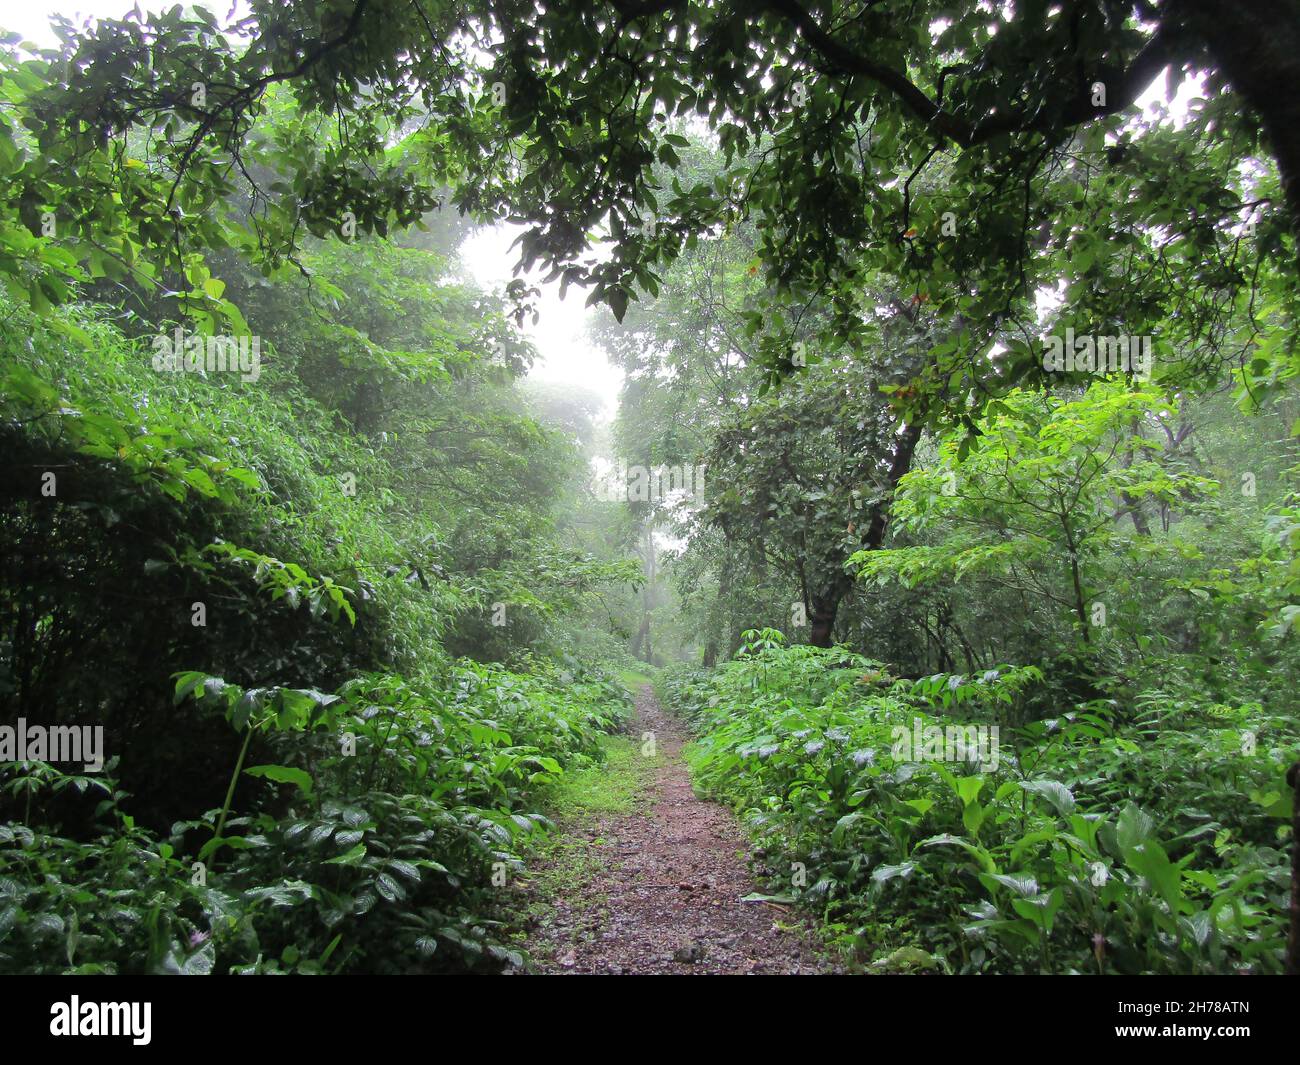 Rain, mist and drenched green forest trail of Nagla, Thane Stock Photo